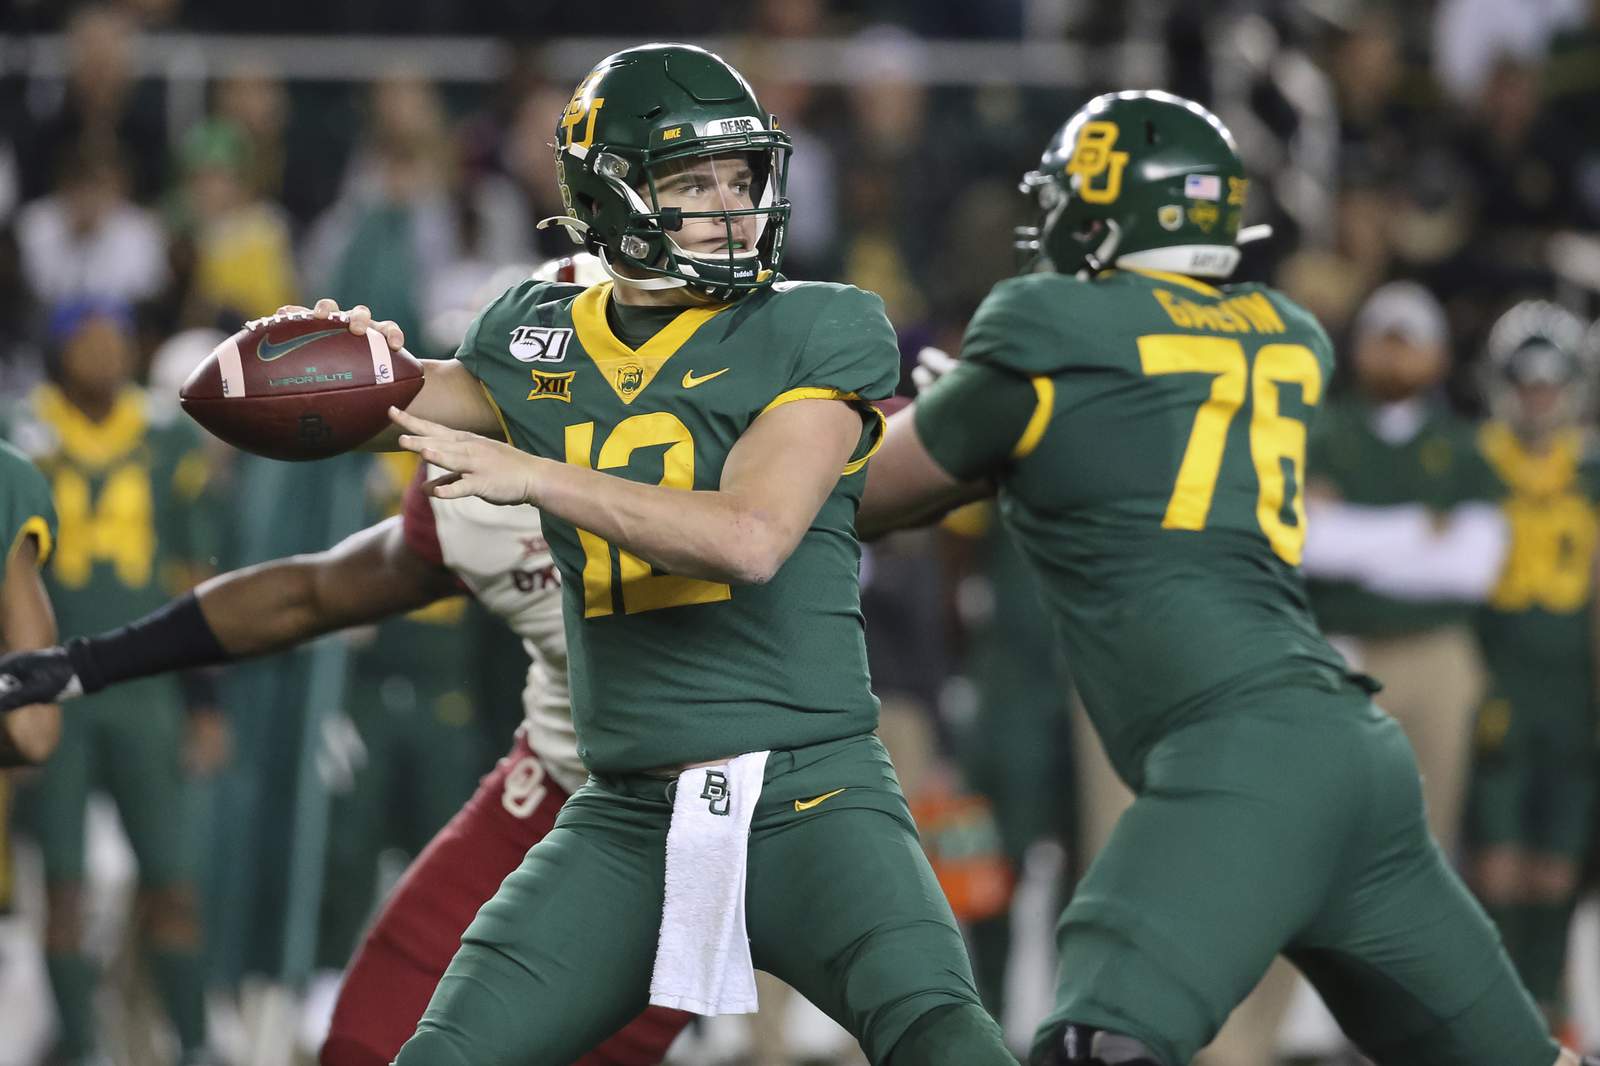 Big 12 conference openers include 1st games for Baylor, TCU